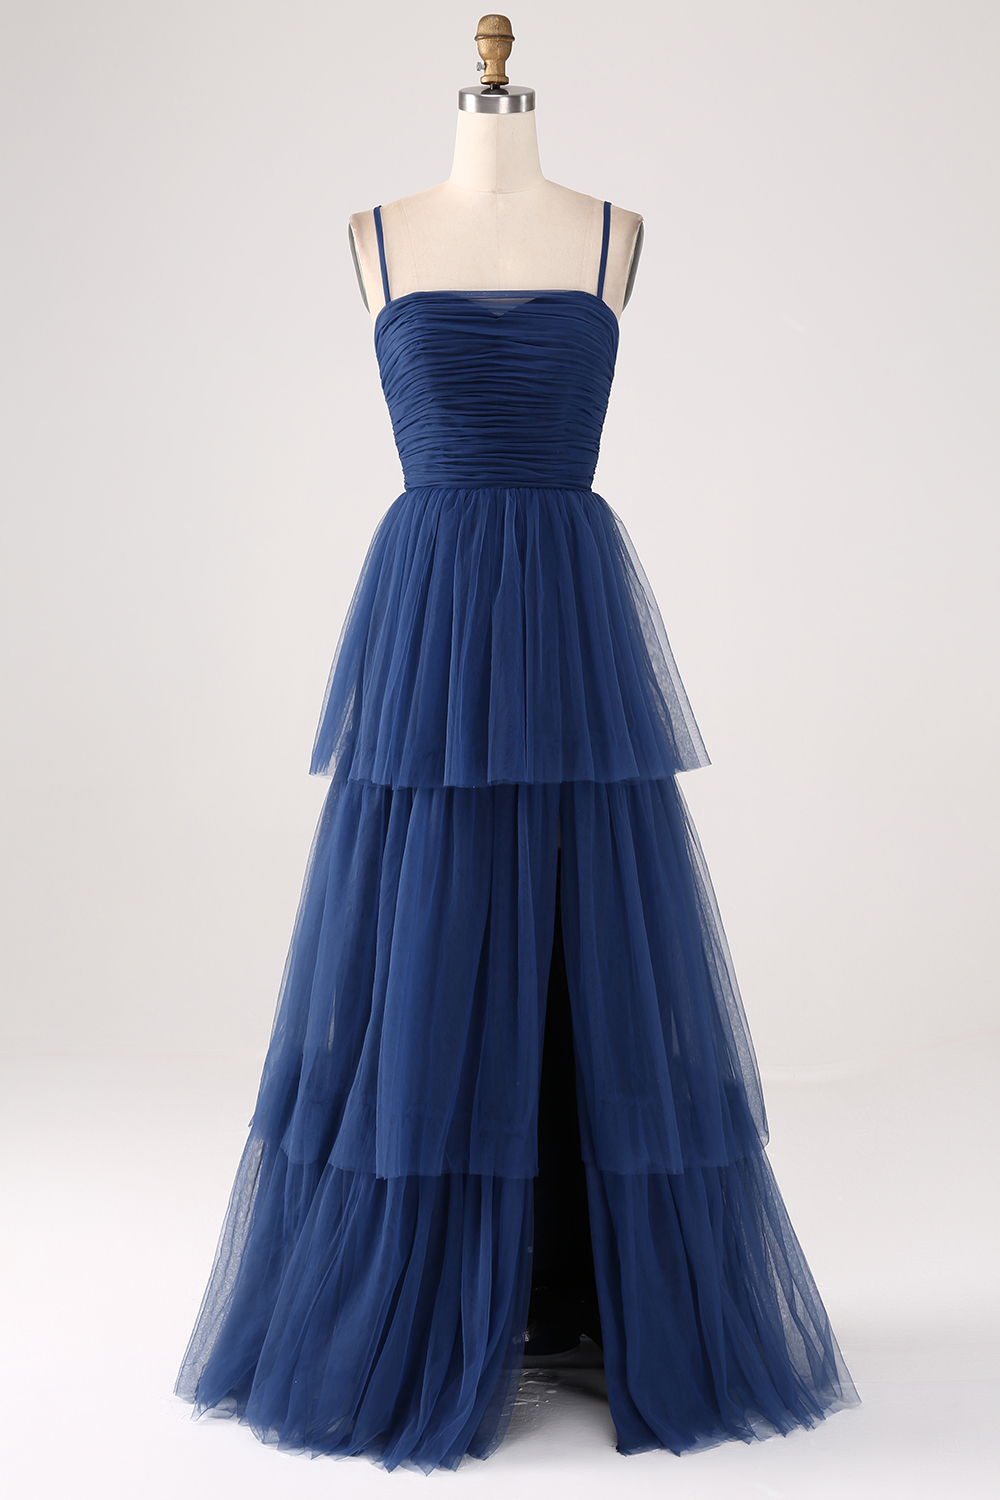 Leely Women Spaghetti Straps A Line Navy Bridesmaid Dress Tulle Tiered Pleated Wedding Party Dress with Slit